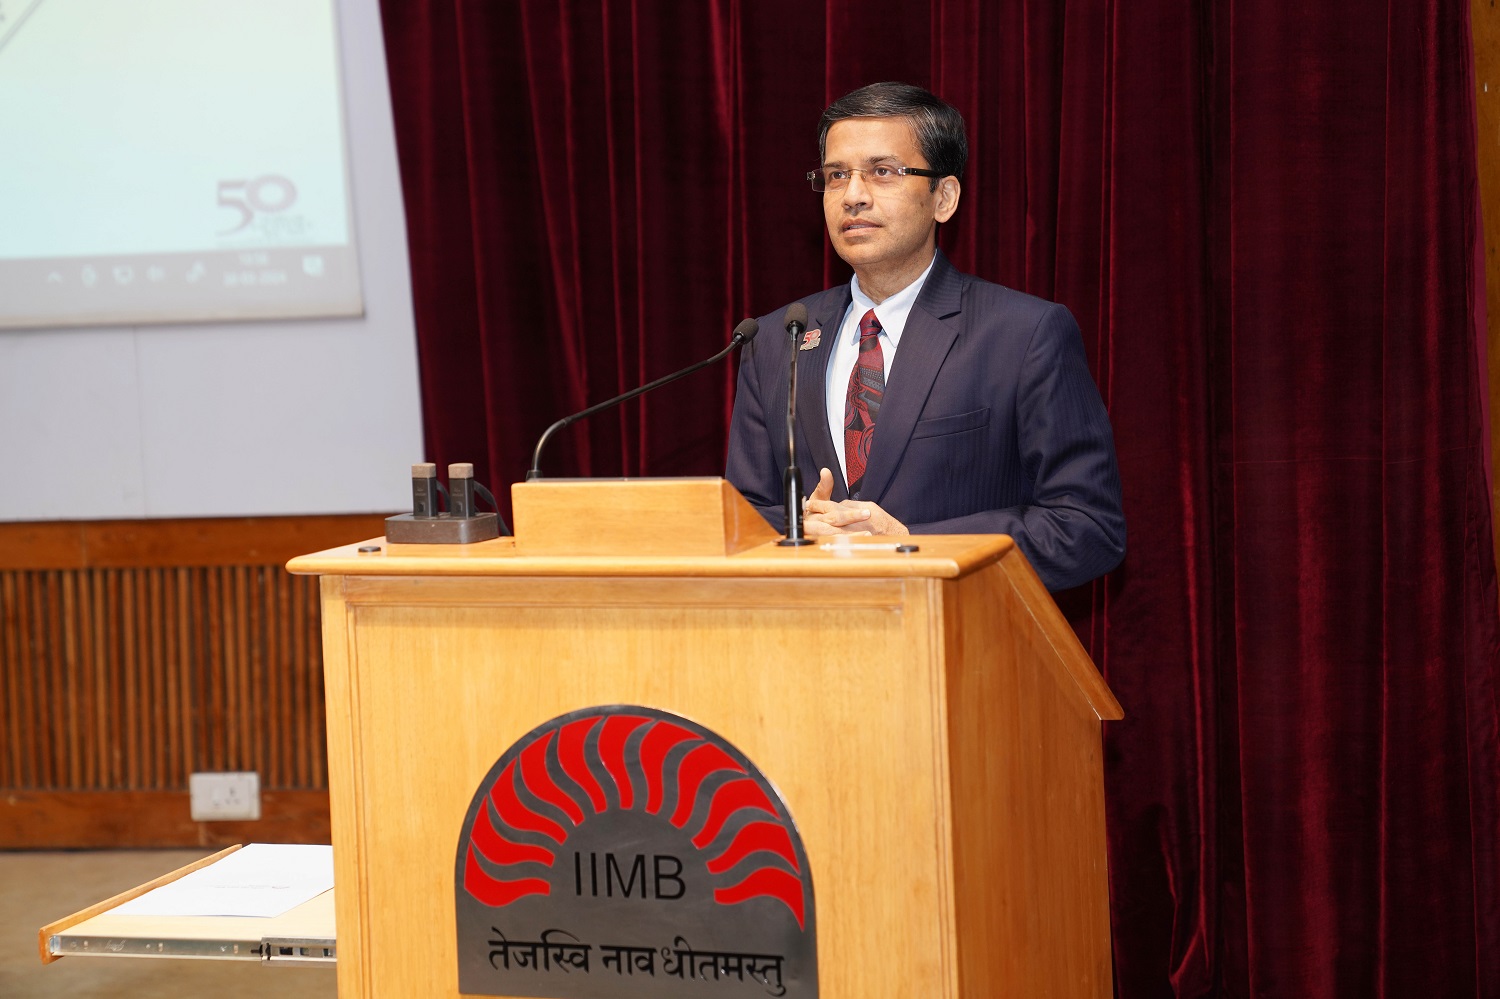 Prof. Sourav Mukherji, Dean, Alumni Relations & Development and faculty of the Organizational Behavior & Human Resources Management area of IIMB, explains how alumni networking can be instrumental in enriching the learning journey of the EPGP cohort. 